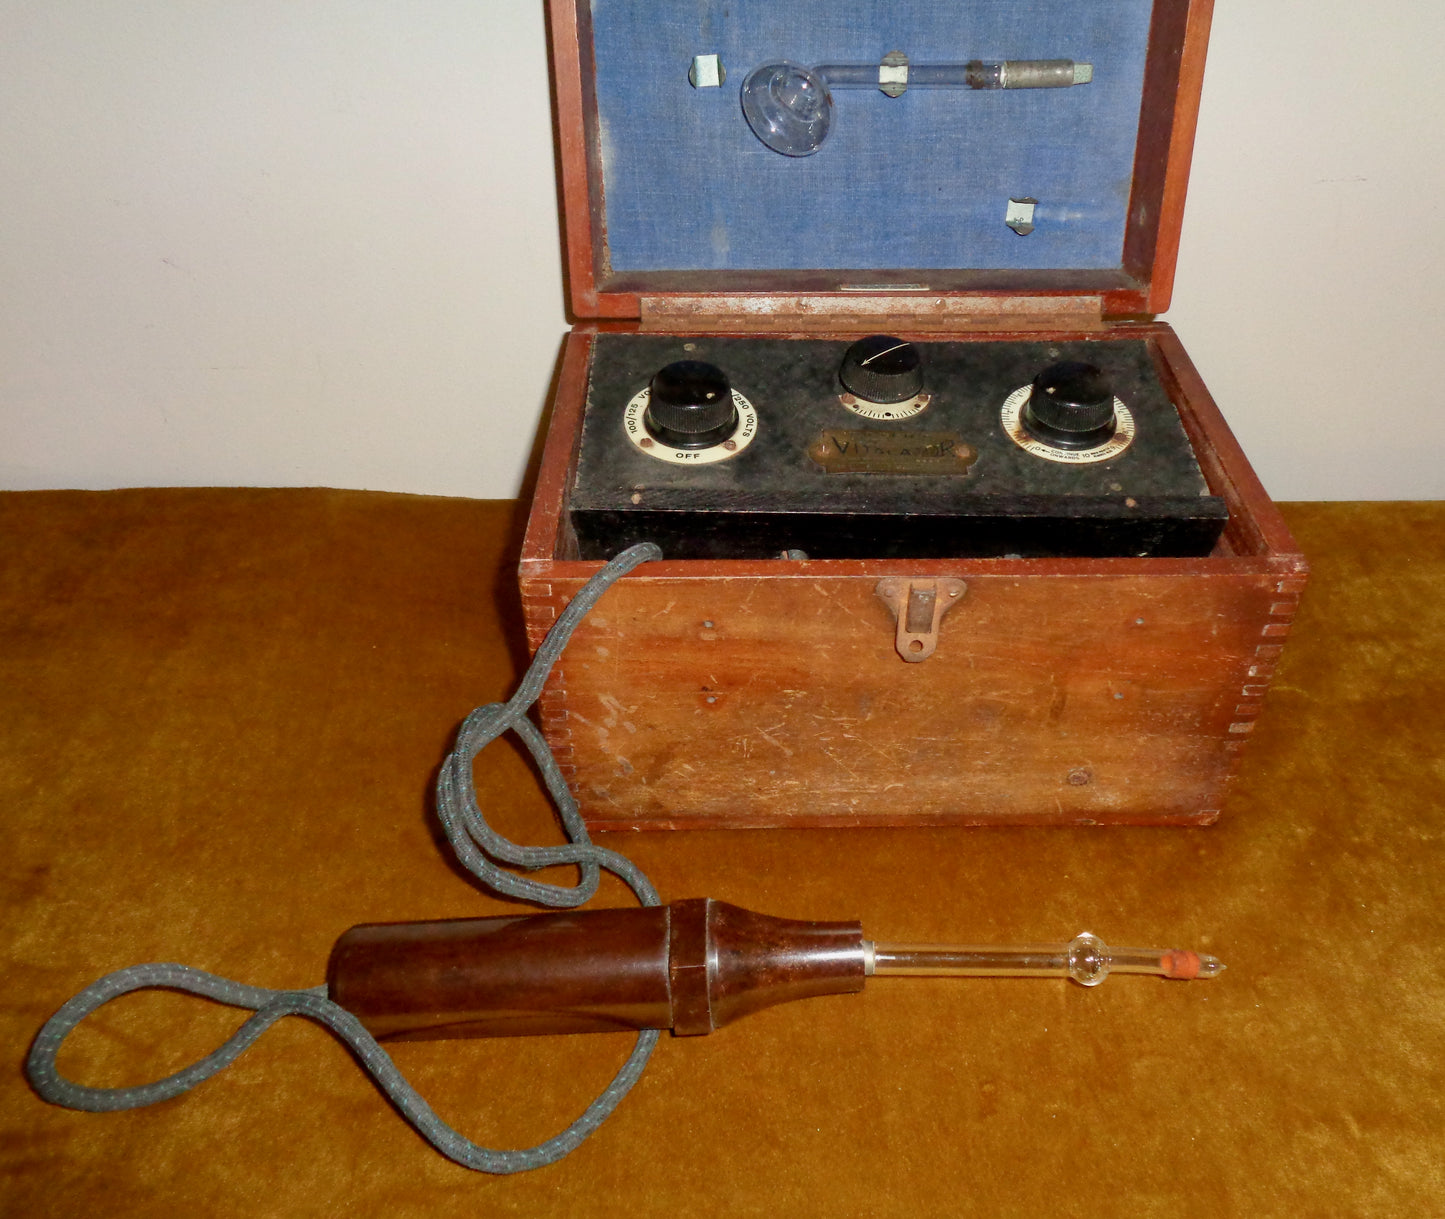 1930s Roger's Violet Ray Home Vitalator Antique Medical Electrotherapy Appliance